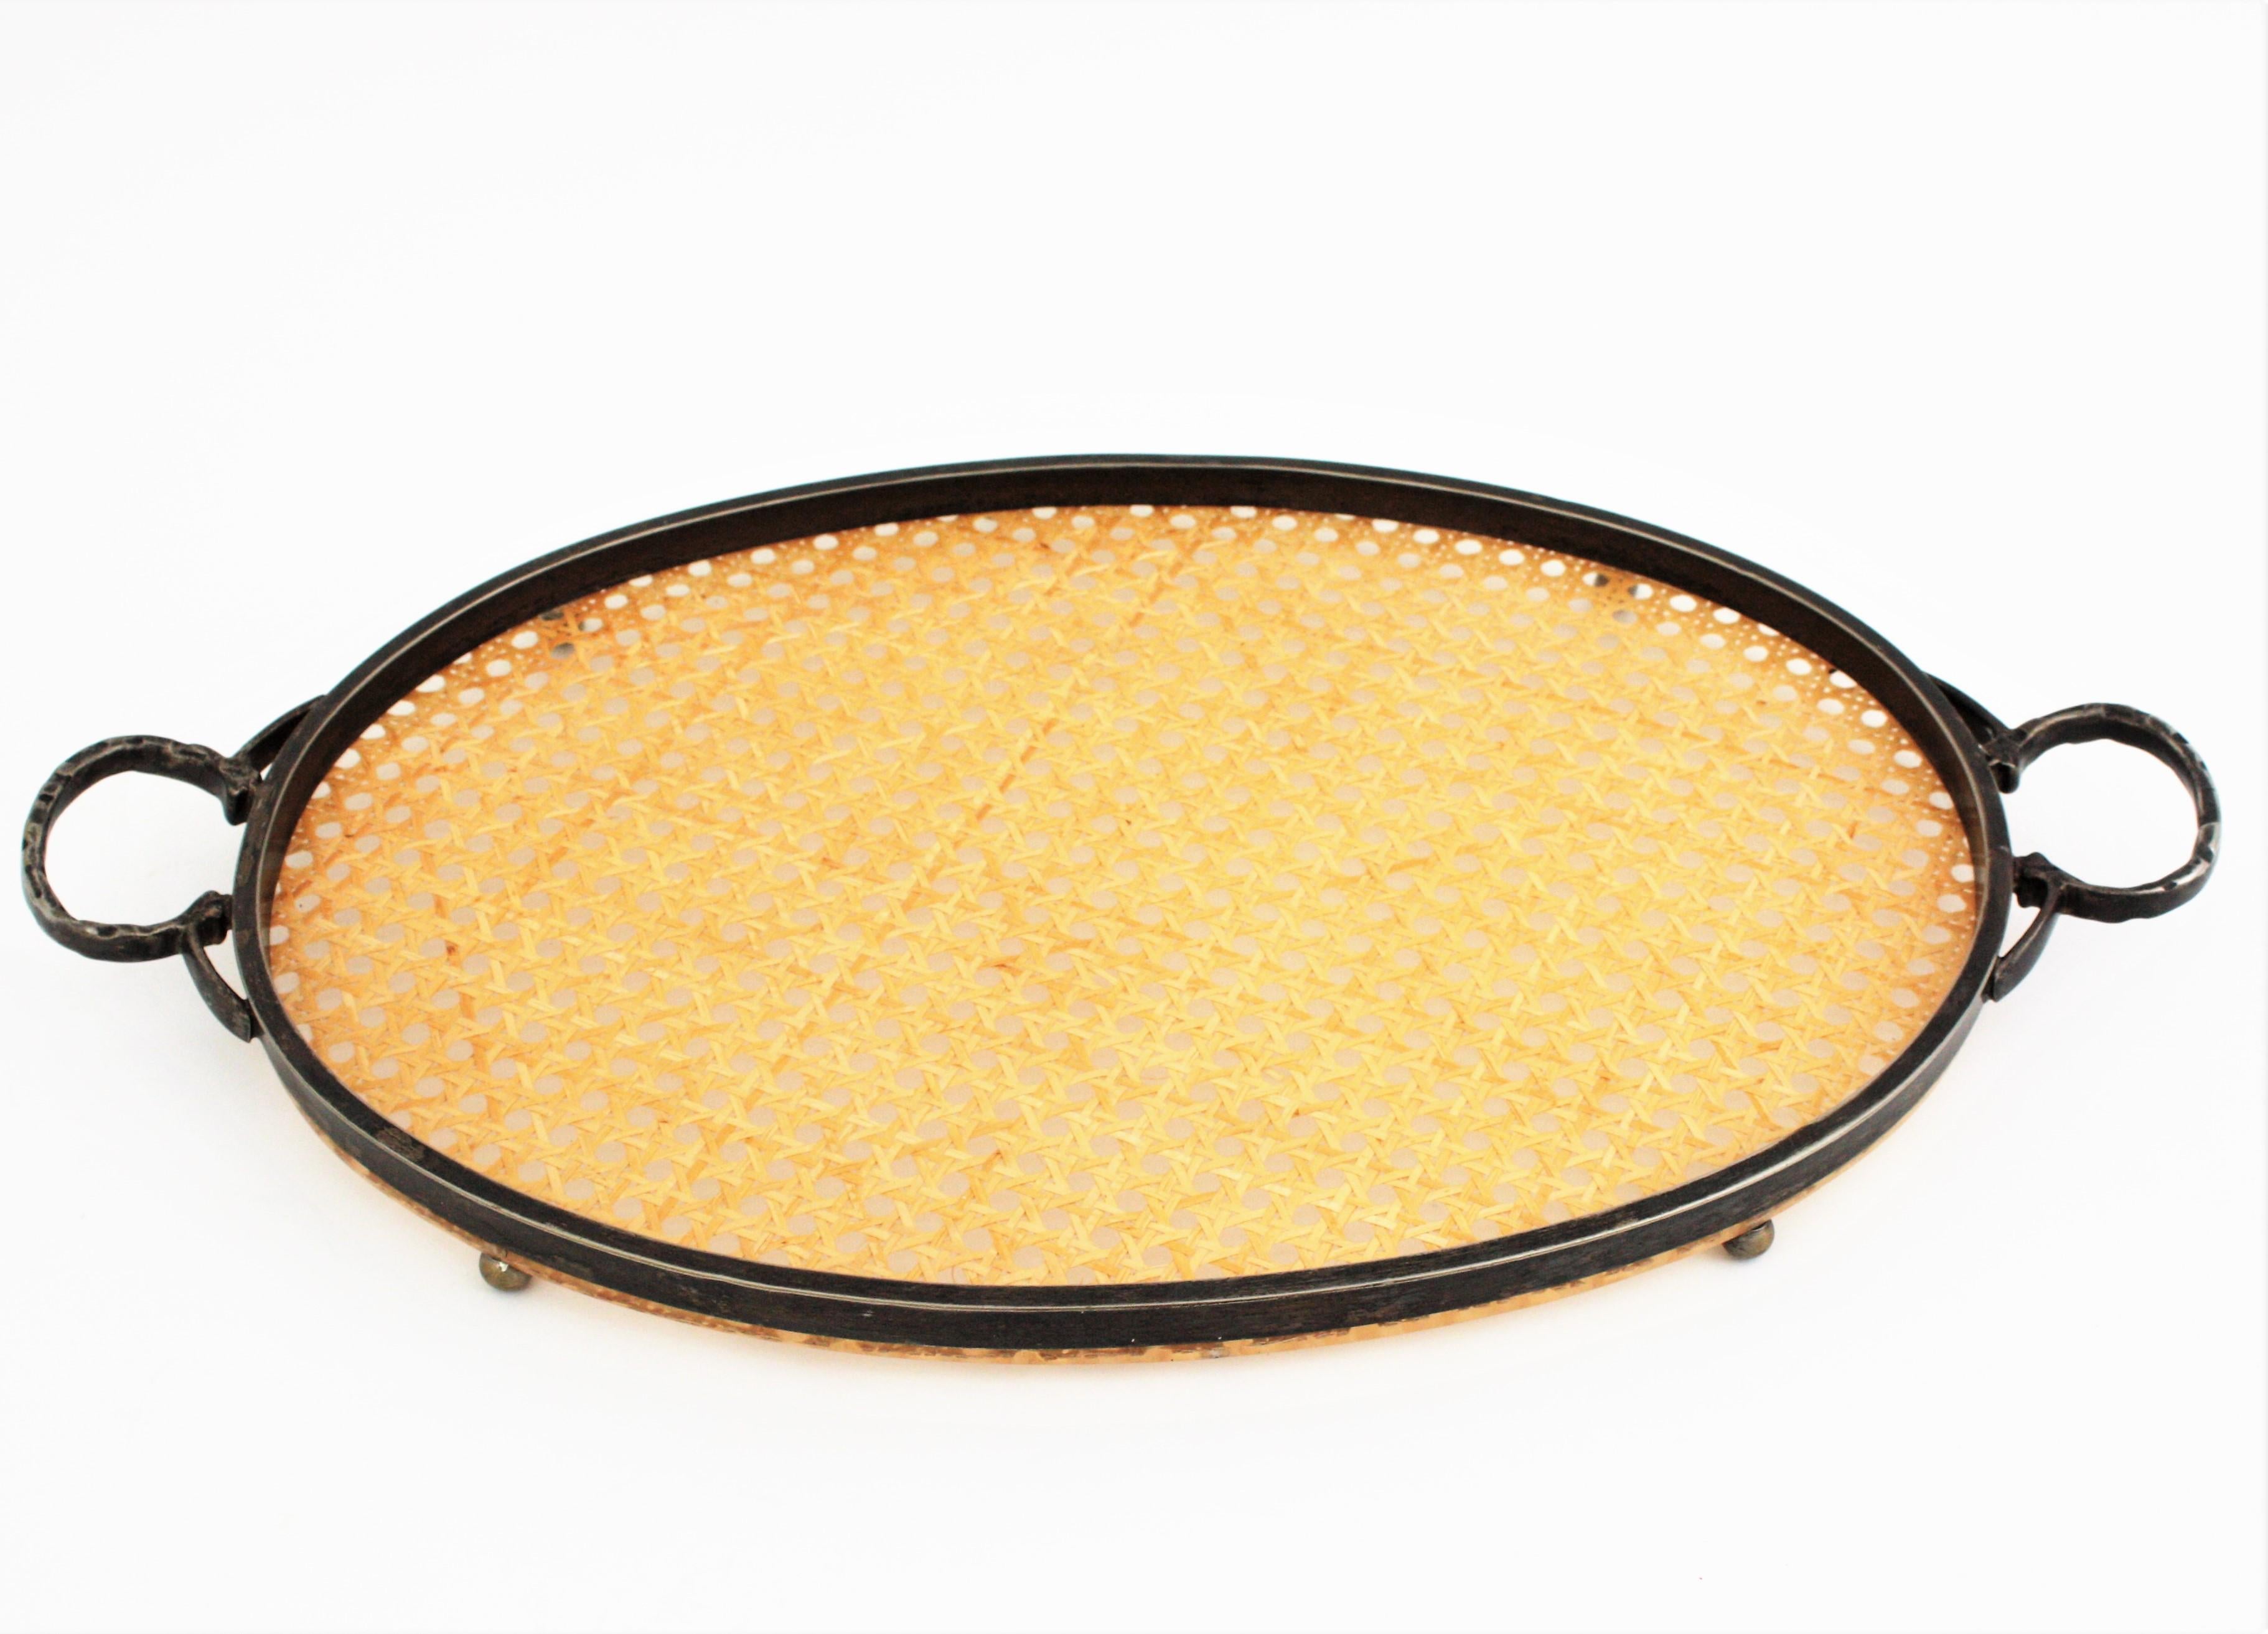 Mid-Century Modern Christian Dior Style Oval Serving Tray in Rattan, Lucite & Metal